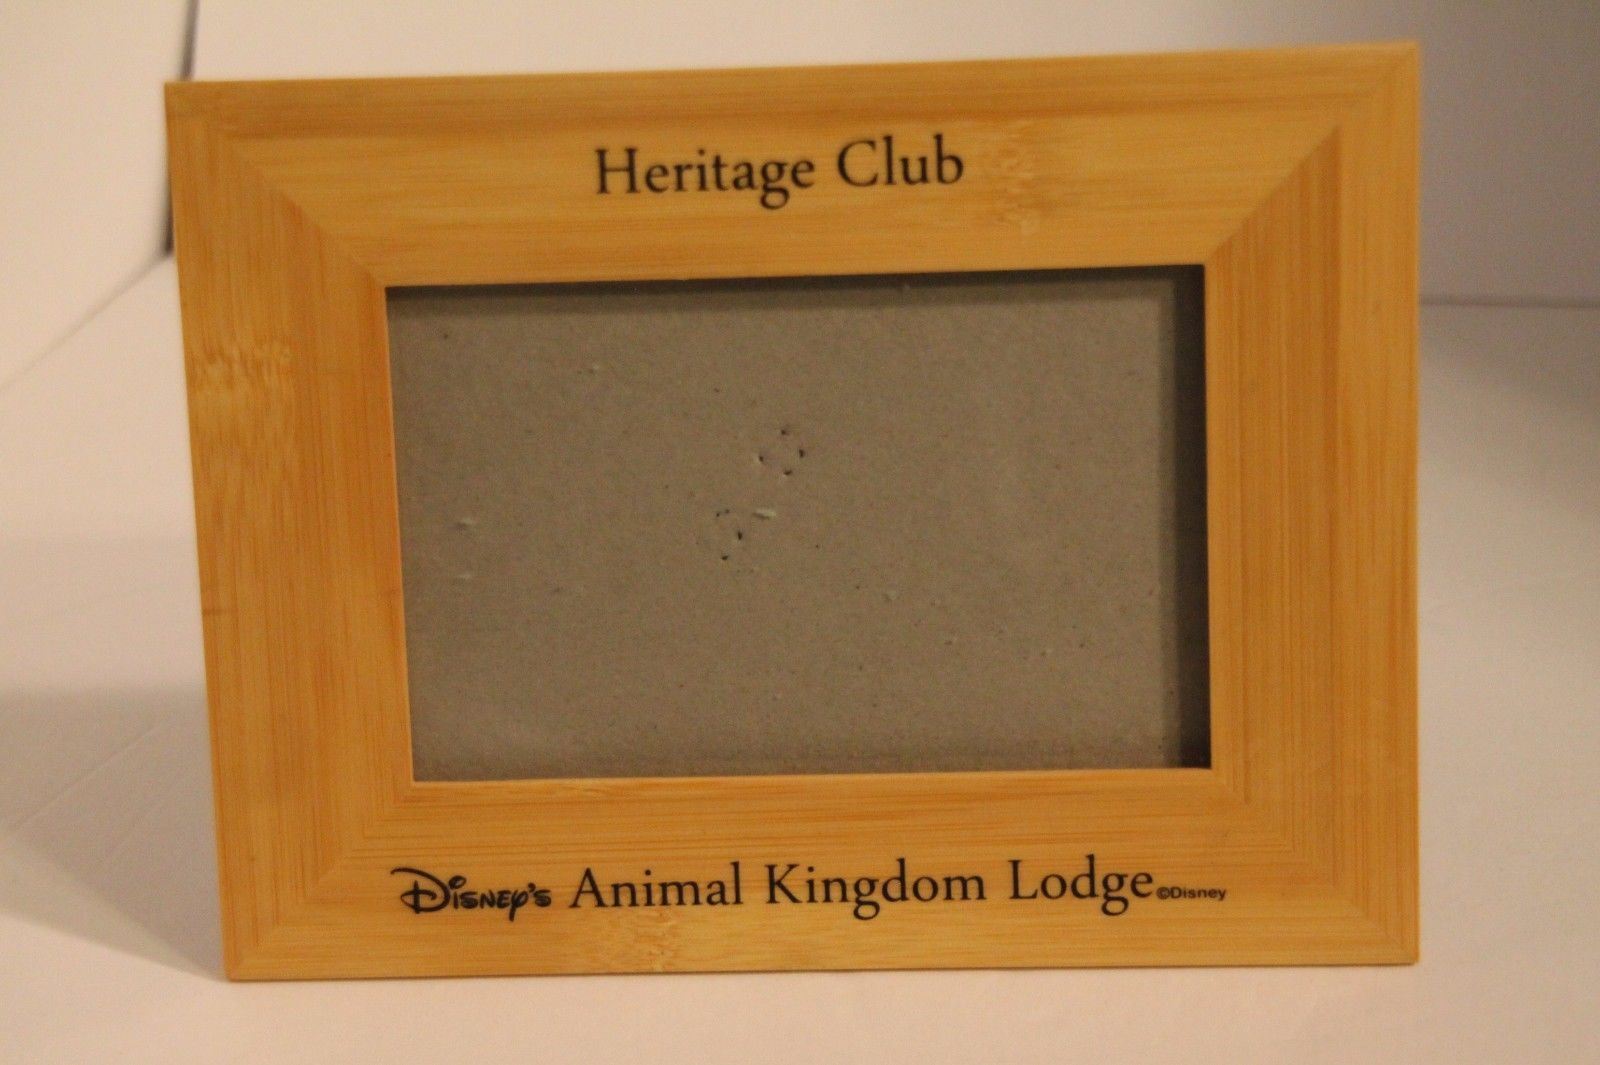 Primary image for Disney's Animal Kingdom Lodge Heritage Club Picture Frame Wood 5 1/2" x 3 1/2"